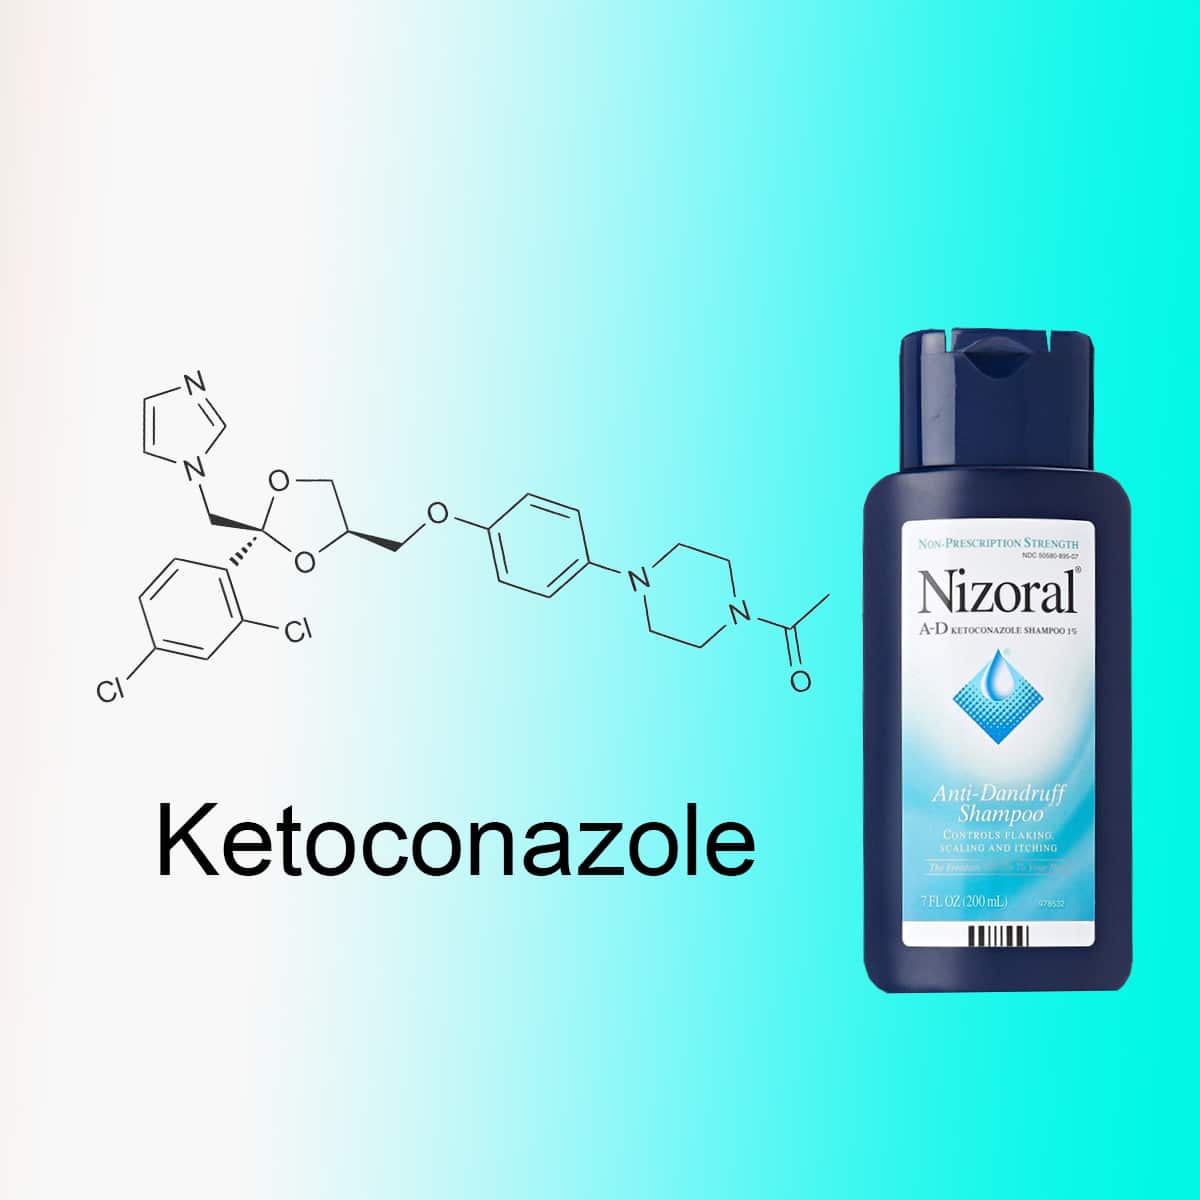 Ketoconazole for How is It? - Hairverse